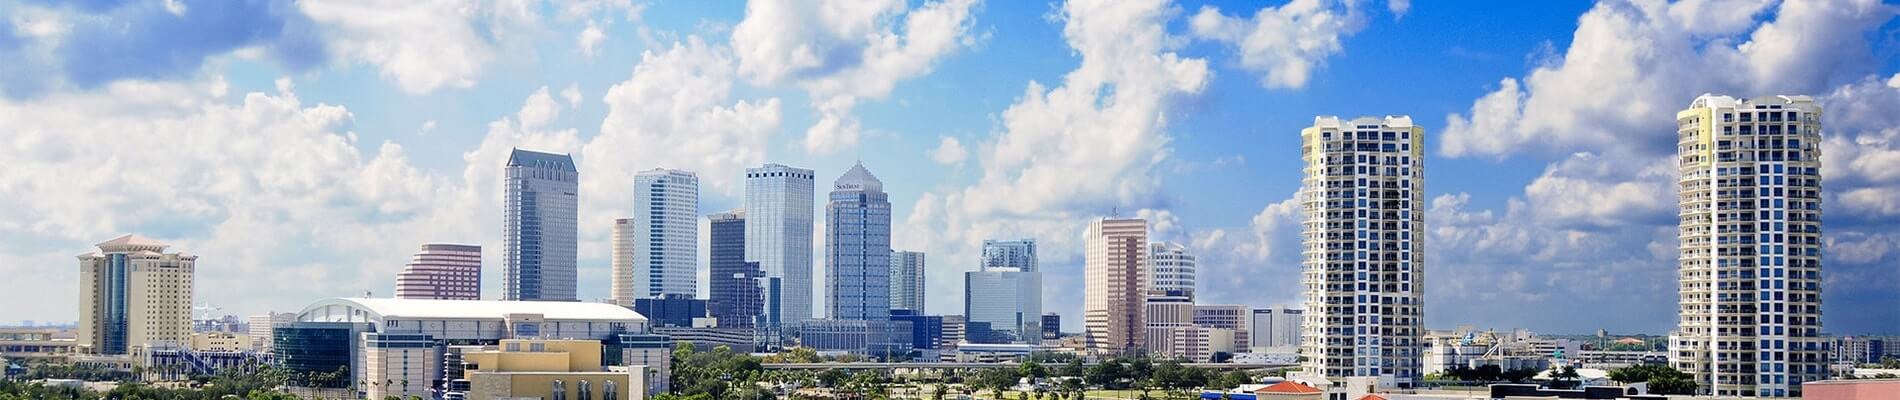 The City Of Tampa